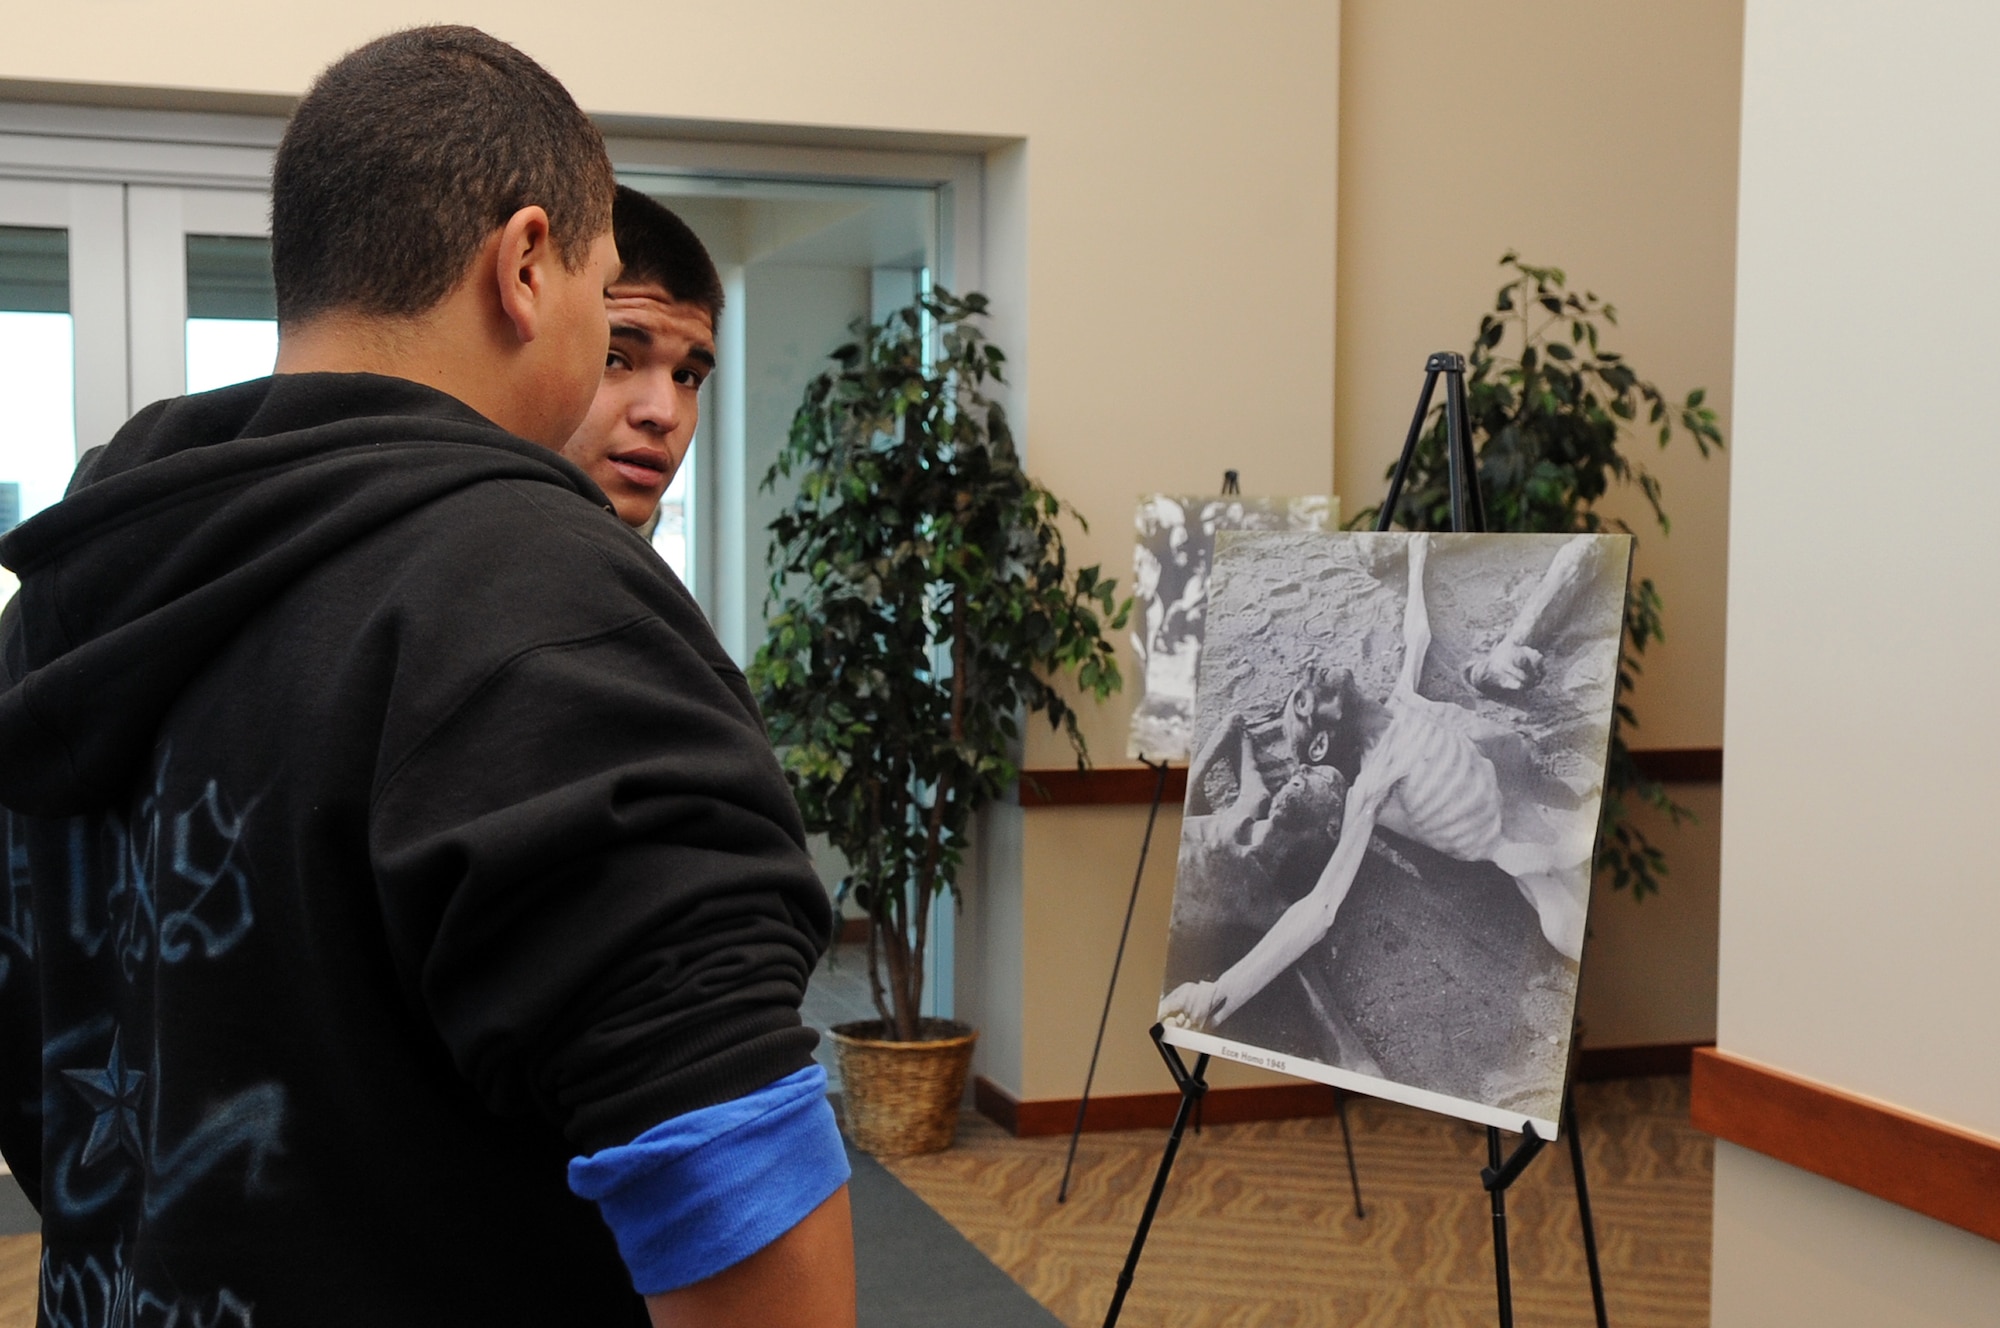 BUCKLEY AIR FORCE BASE, Colo. -- Hinkley High School students view photos of Holocaust victims April 9. Students from two local high schools were invited to the Days of Remembrance observance on Buckley. (U.S. Air Force Photo by Airman 1st Class Marcy Glass)

